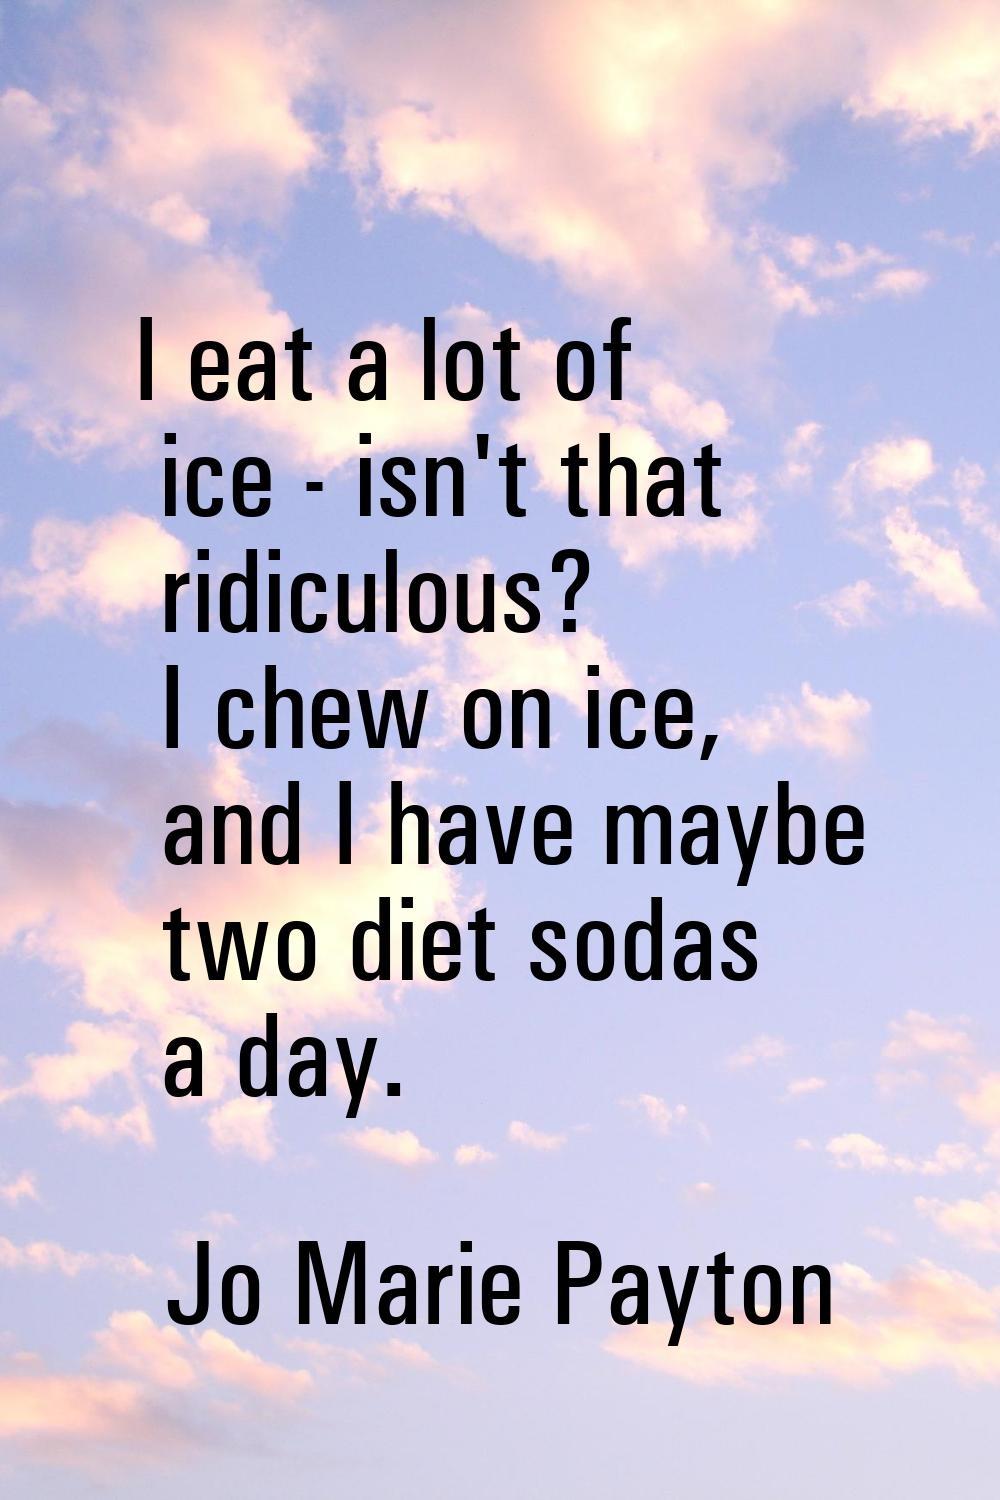 I eat a lot of ice - isn't that ridiculous? I chew on ice, and I have maybe two diet sodas a day.